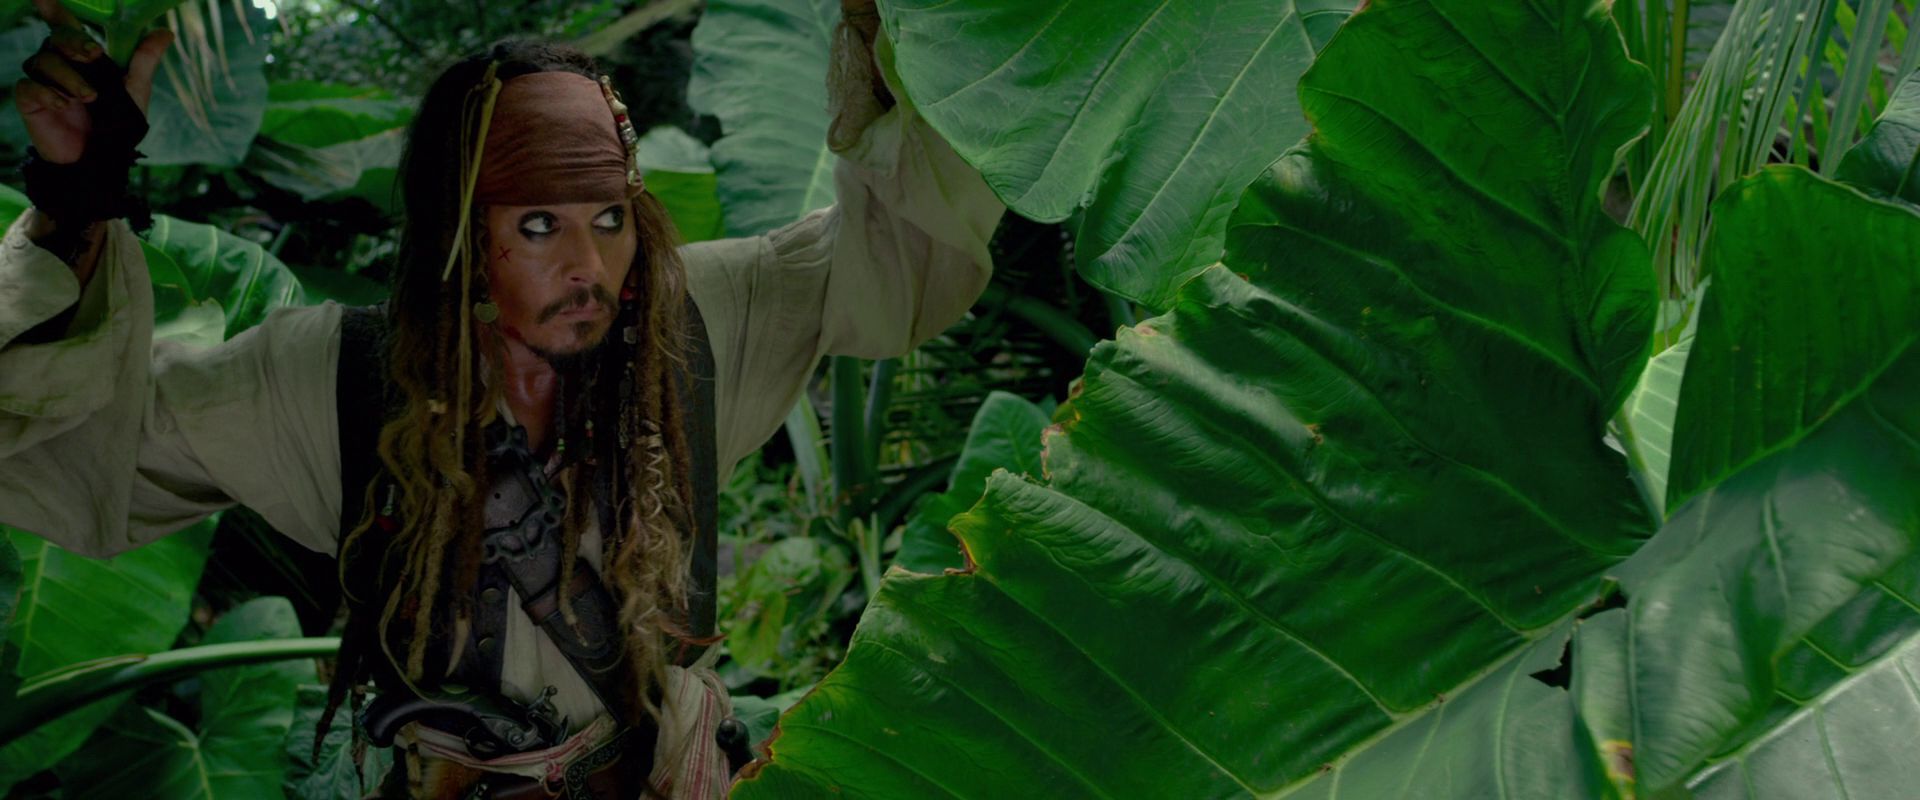 Unnamed island - Pirates of the Caribbean Wiki - The Unofficial Pirates ...